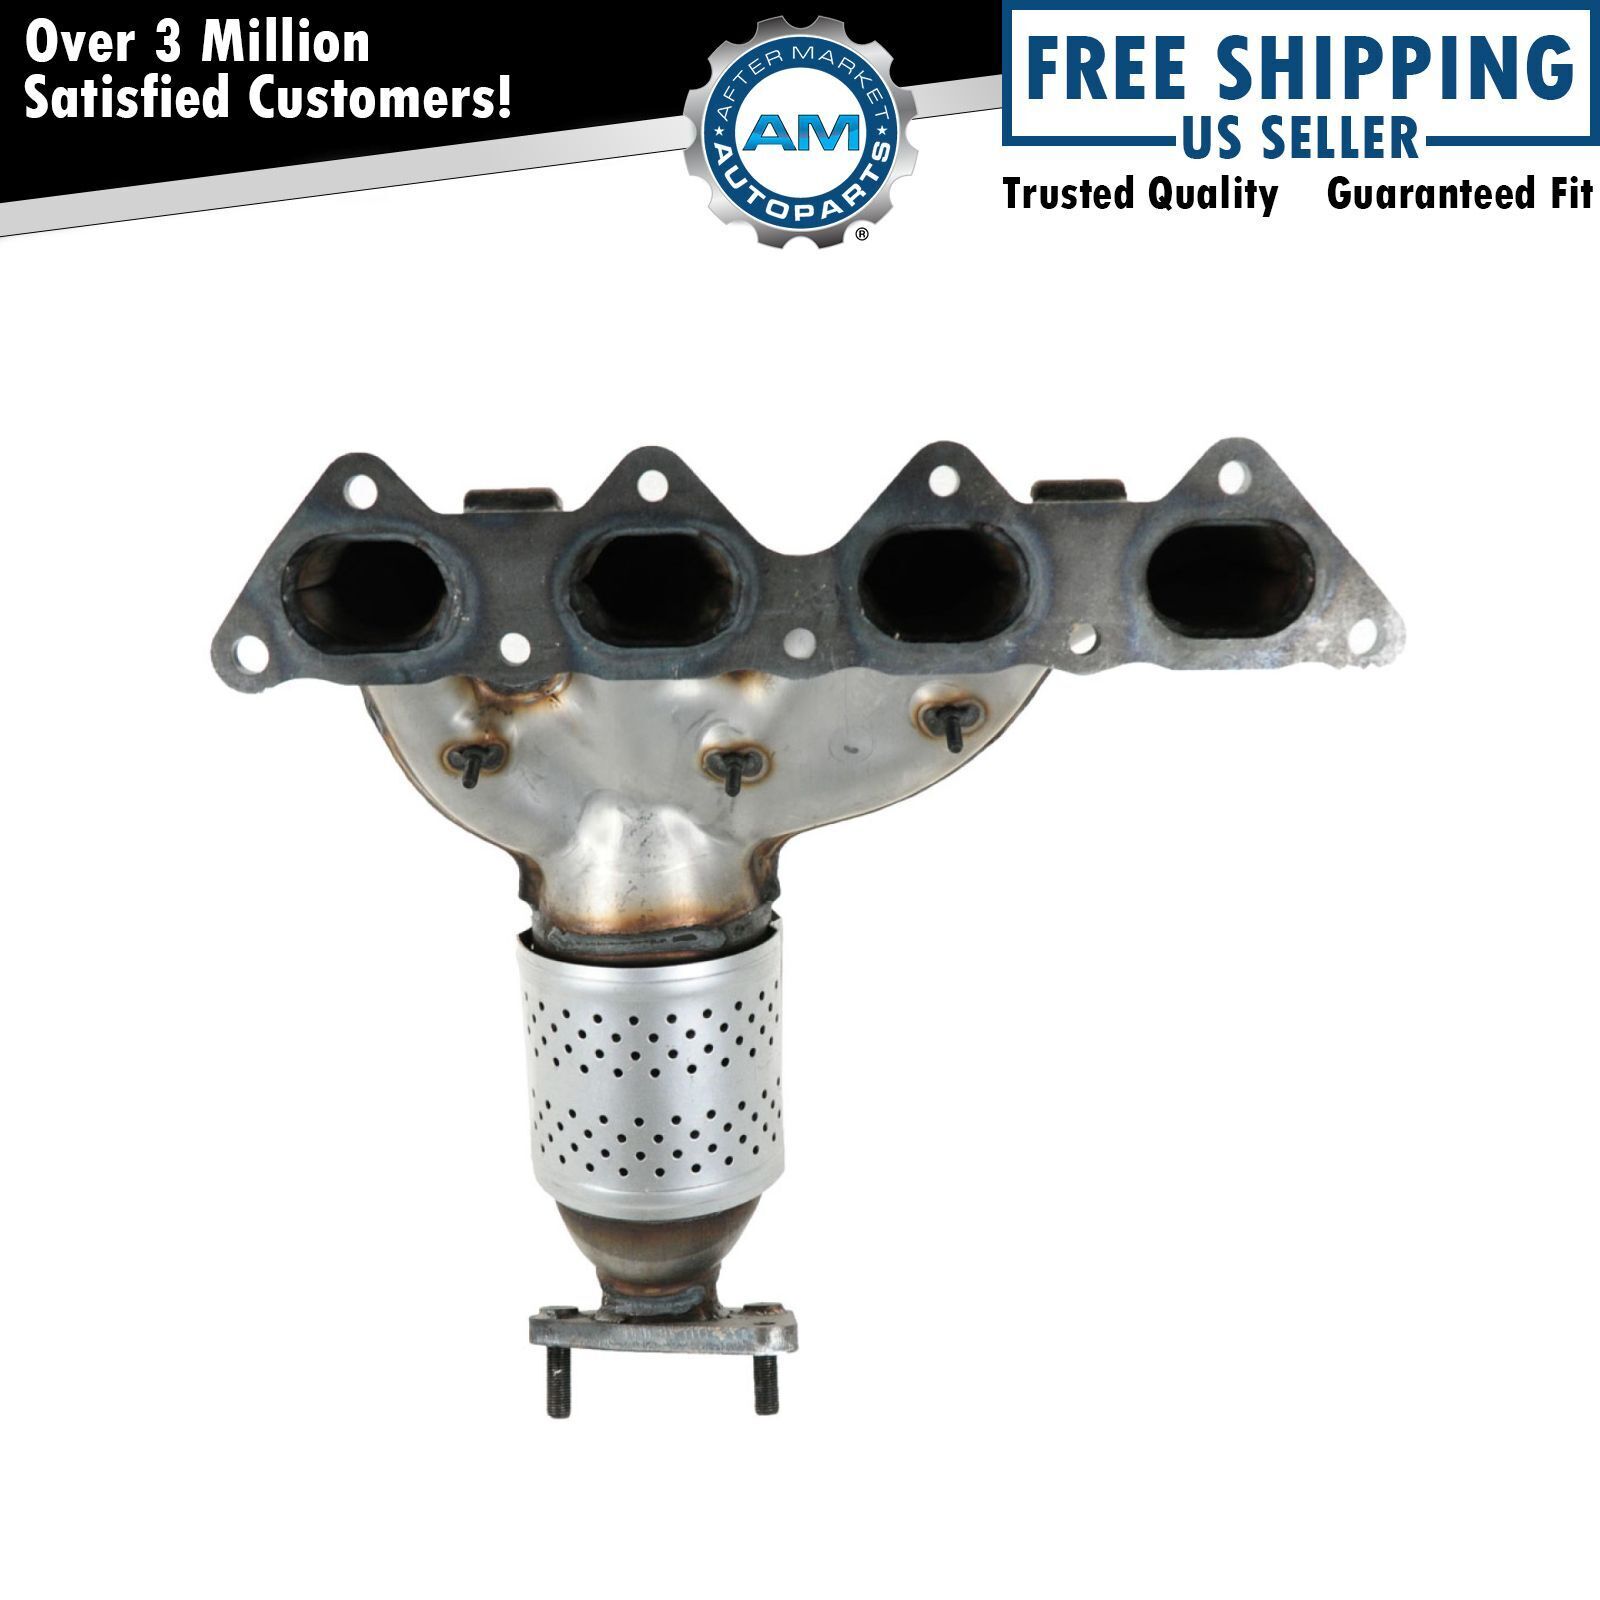 Exhaust Manifold Catalytic Converter for Eclipse Stratus Galant Sebring 2.4L